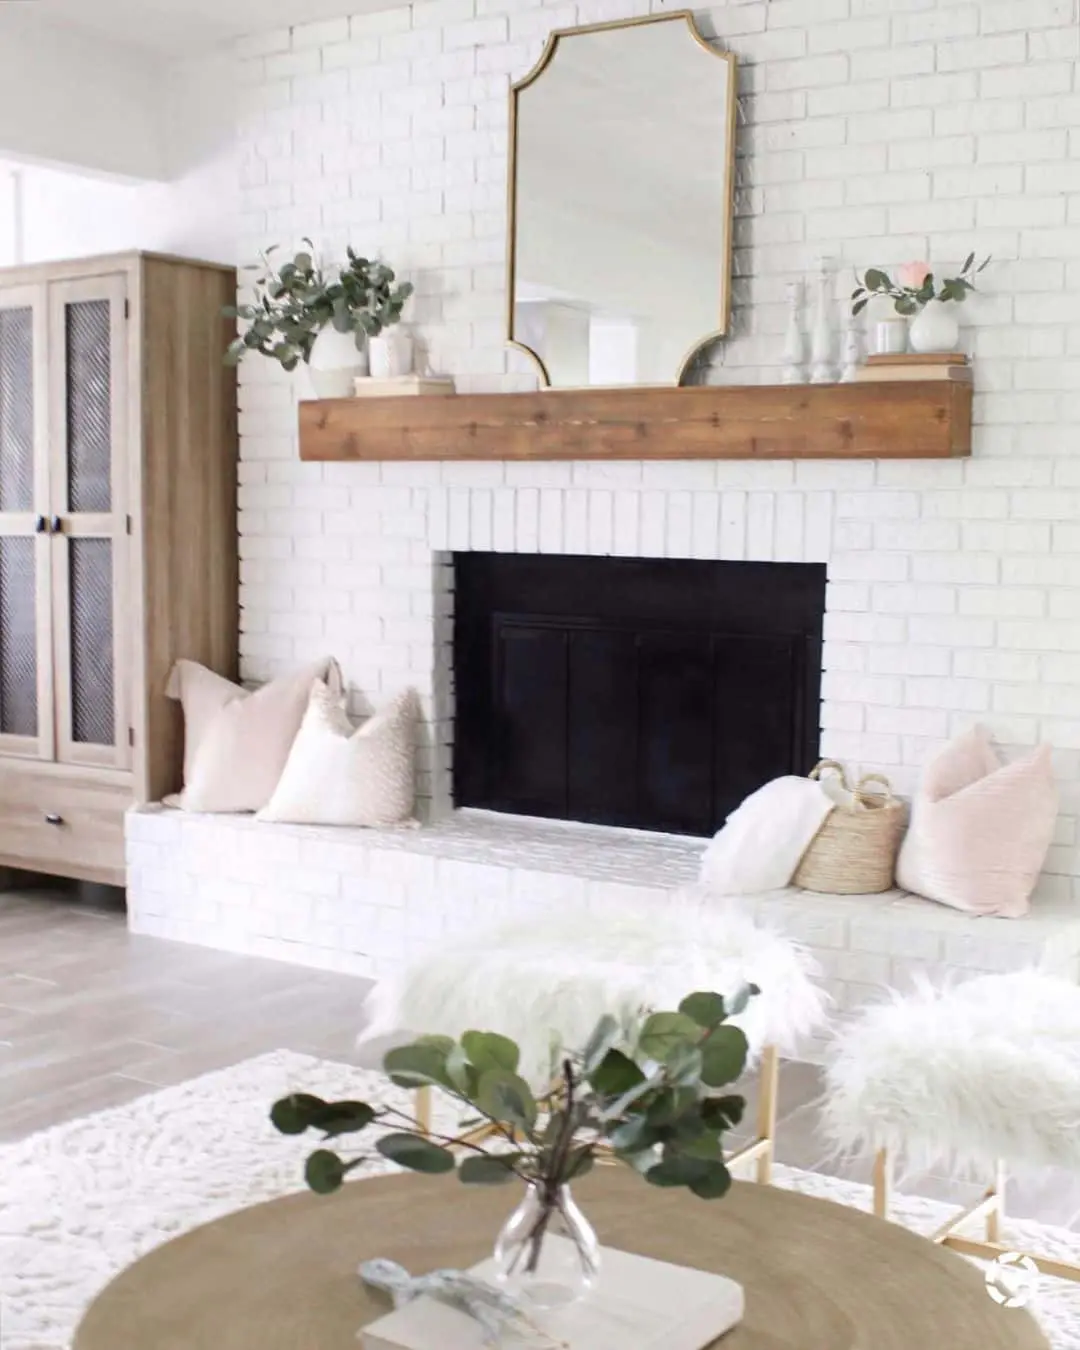 Mirror above fireplace ideas; Instead of opting for a rectangular mirror, consider choosing a large mirror with scalloped corners. This unique style serves as a perfect alternative and seamlessly complements cottage-style, transitional, and farmhouse interiors. The scalloped corners add a charming and distinctive touch, effortlessly blending in with the overall aesthetic of the space.